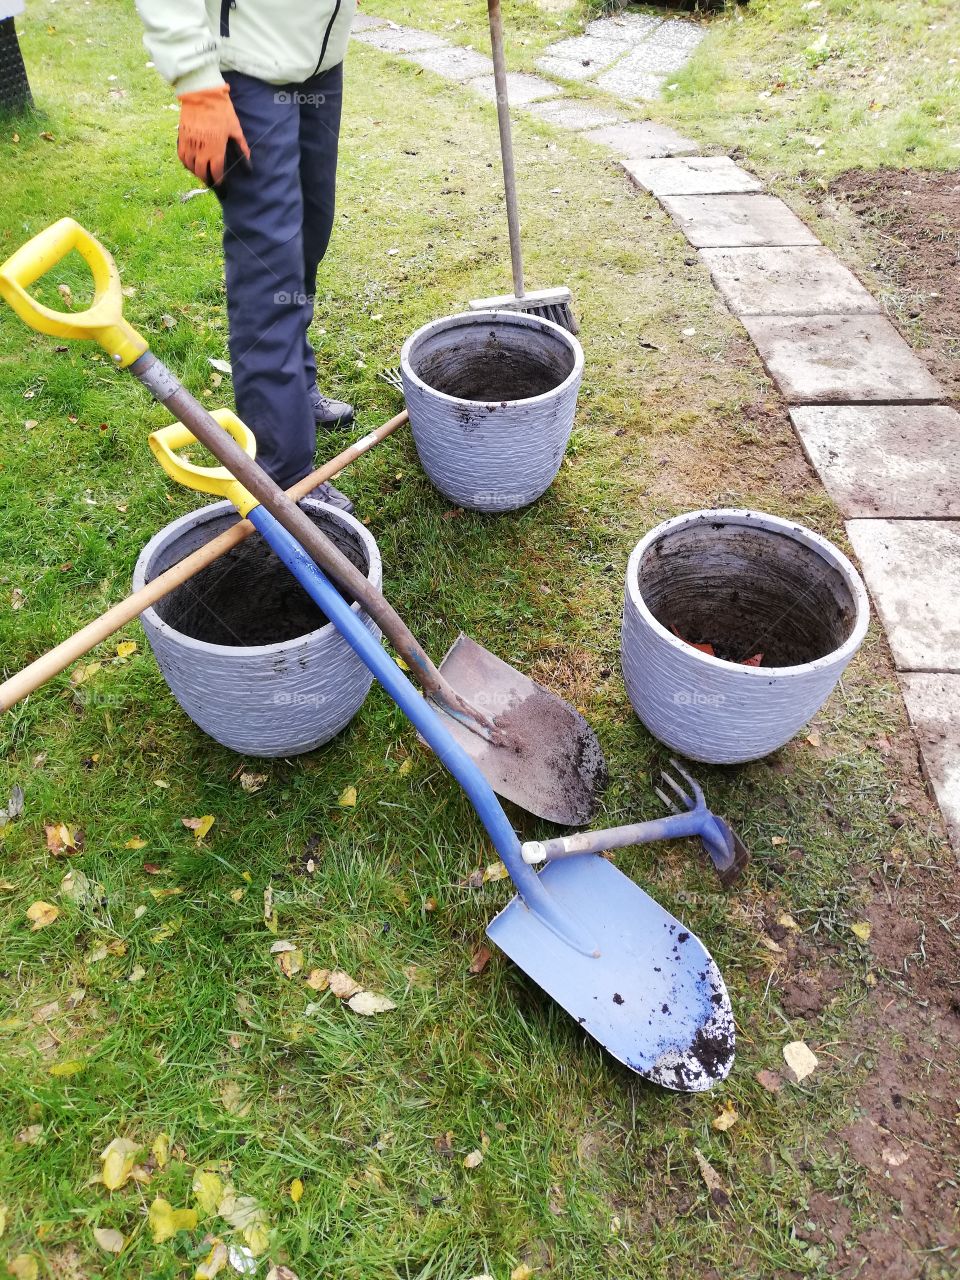 The tools of gardening: a rake and two shovels leaning on the empty flower pot. A hoe on the grass and a man standing a brush in his hand. The tiles for passing are set in the ground one after another